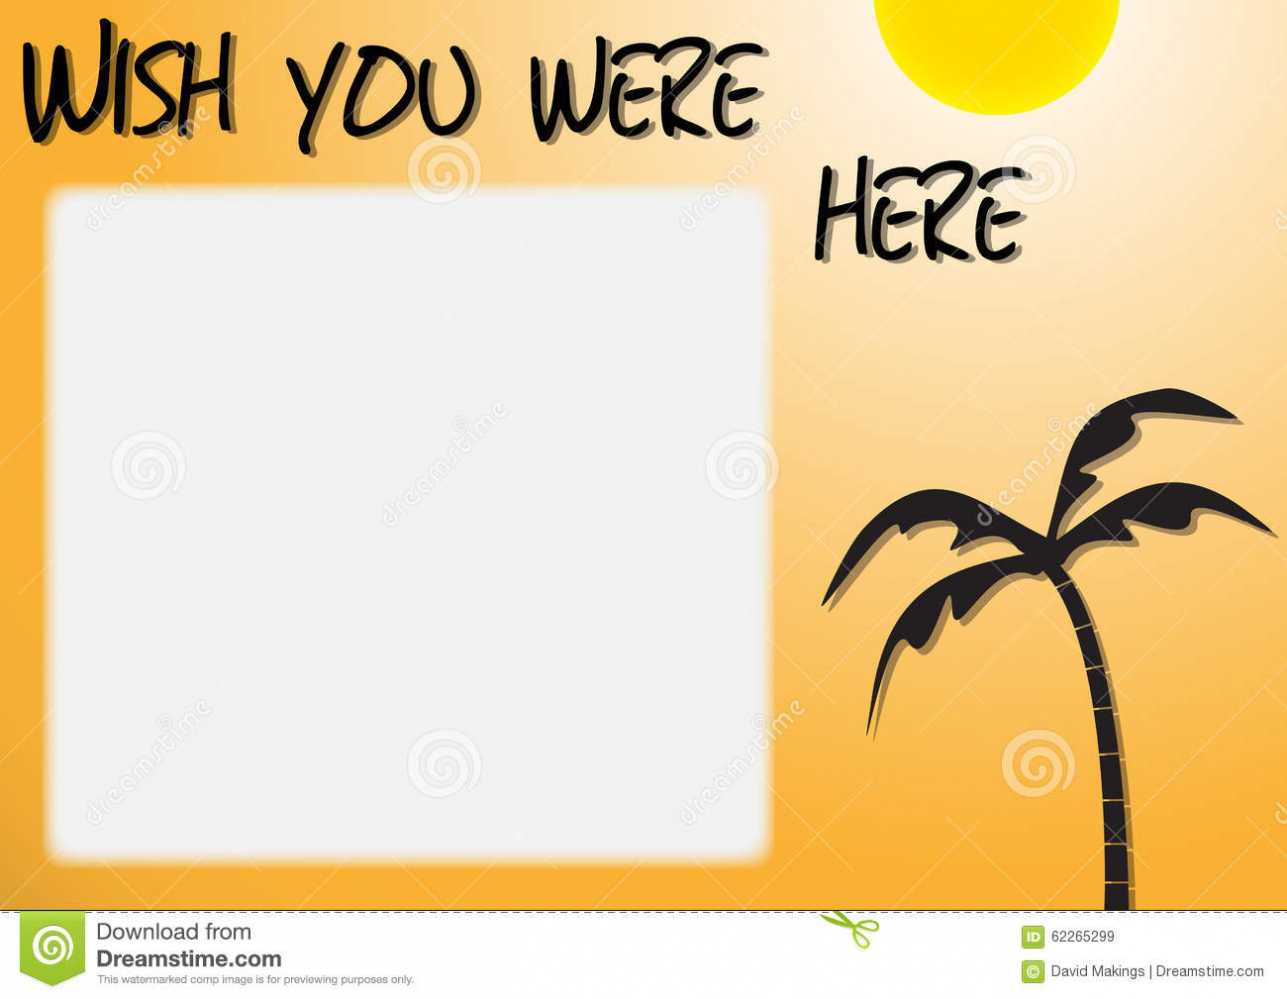 Wish You Were Here Postcard Template intended for Wish You Were Here Postcard Template